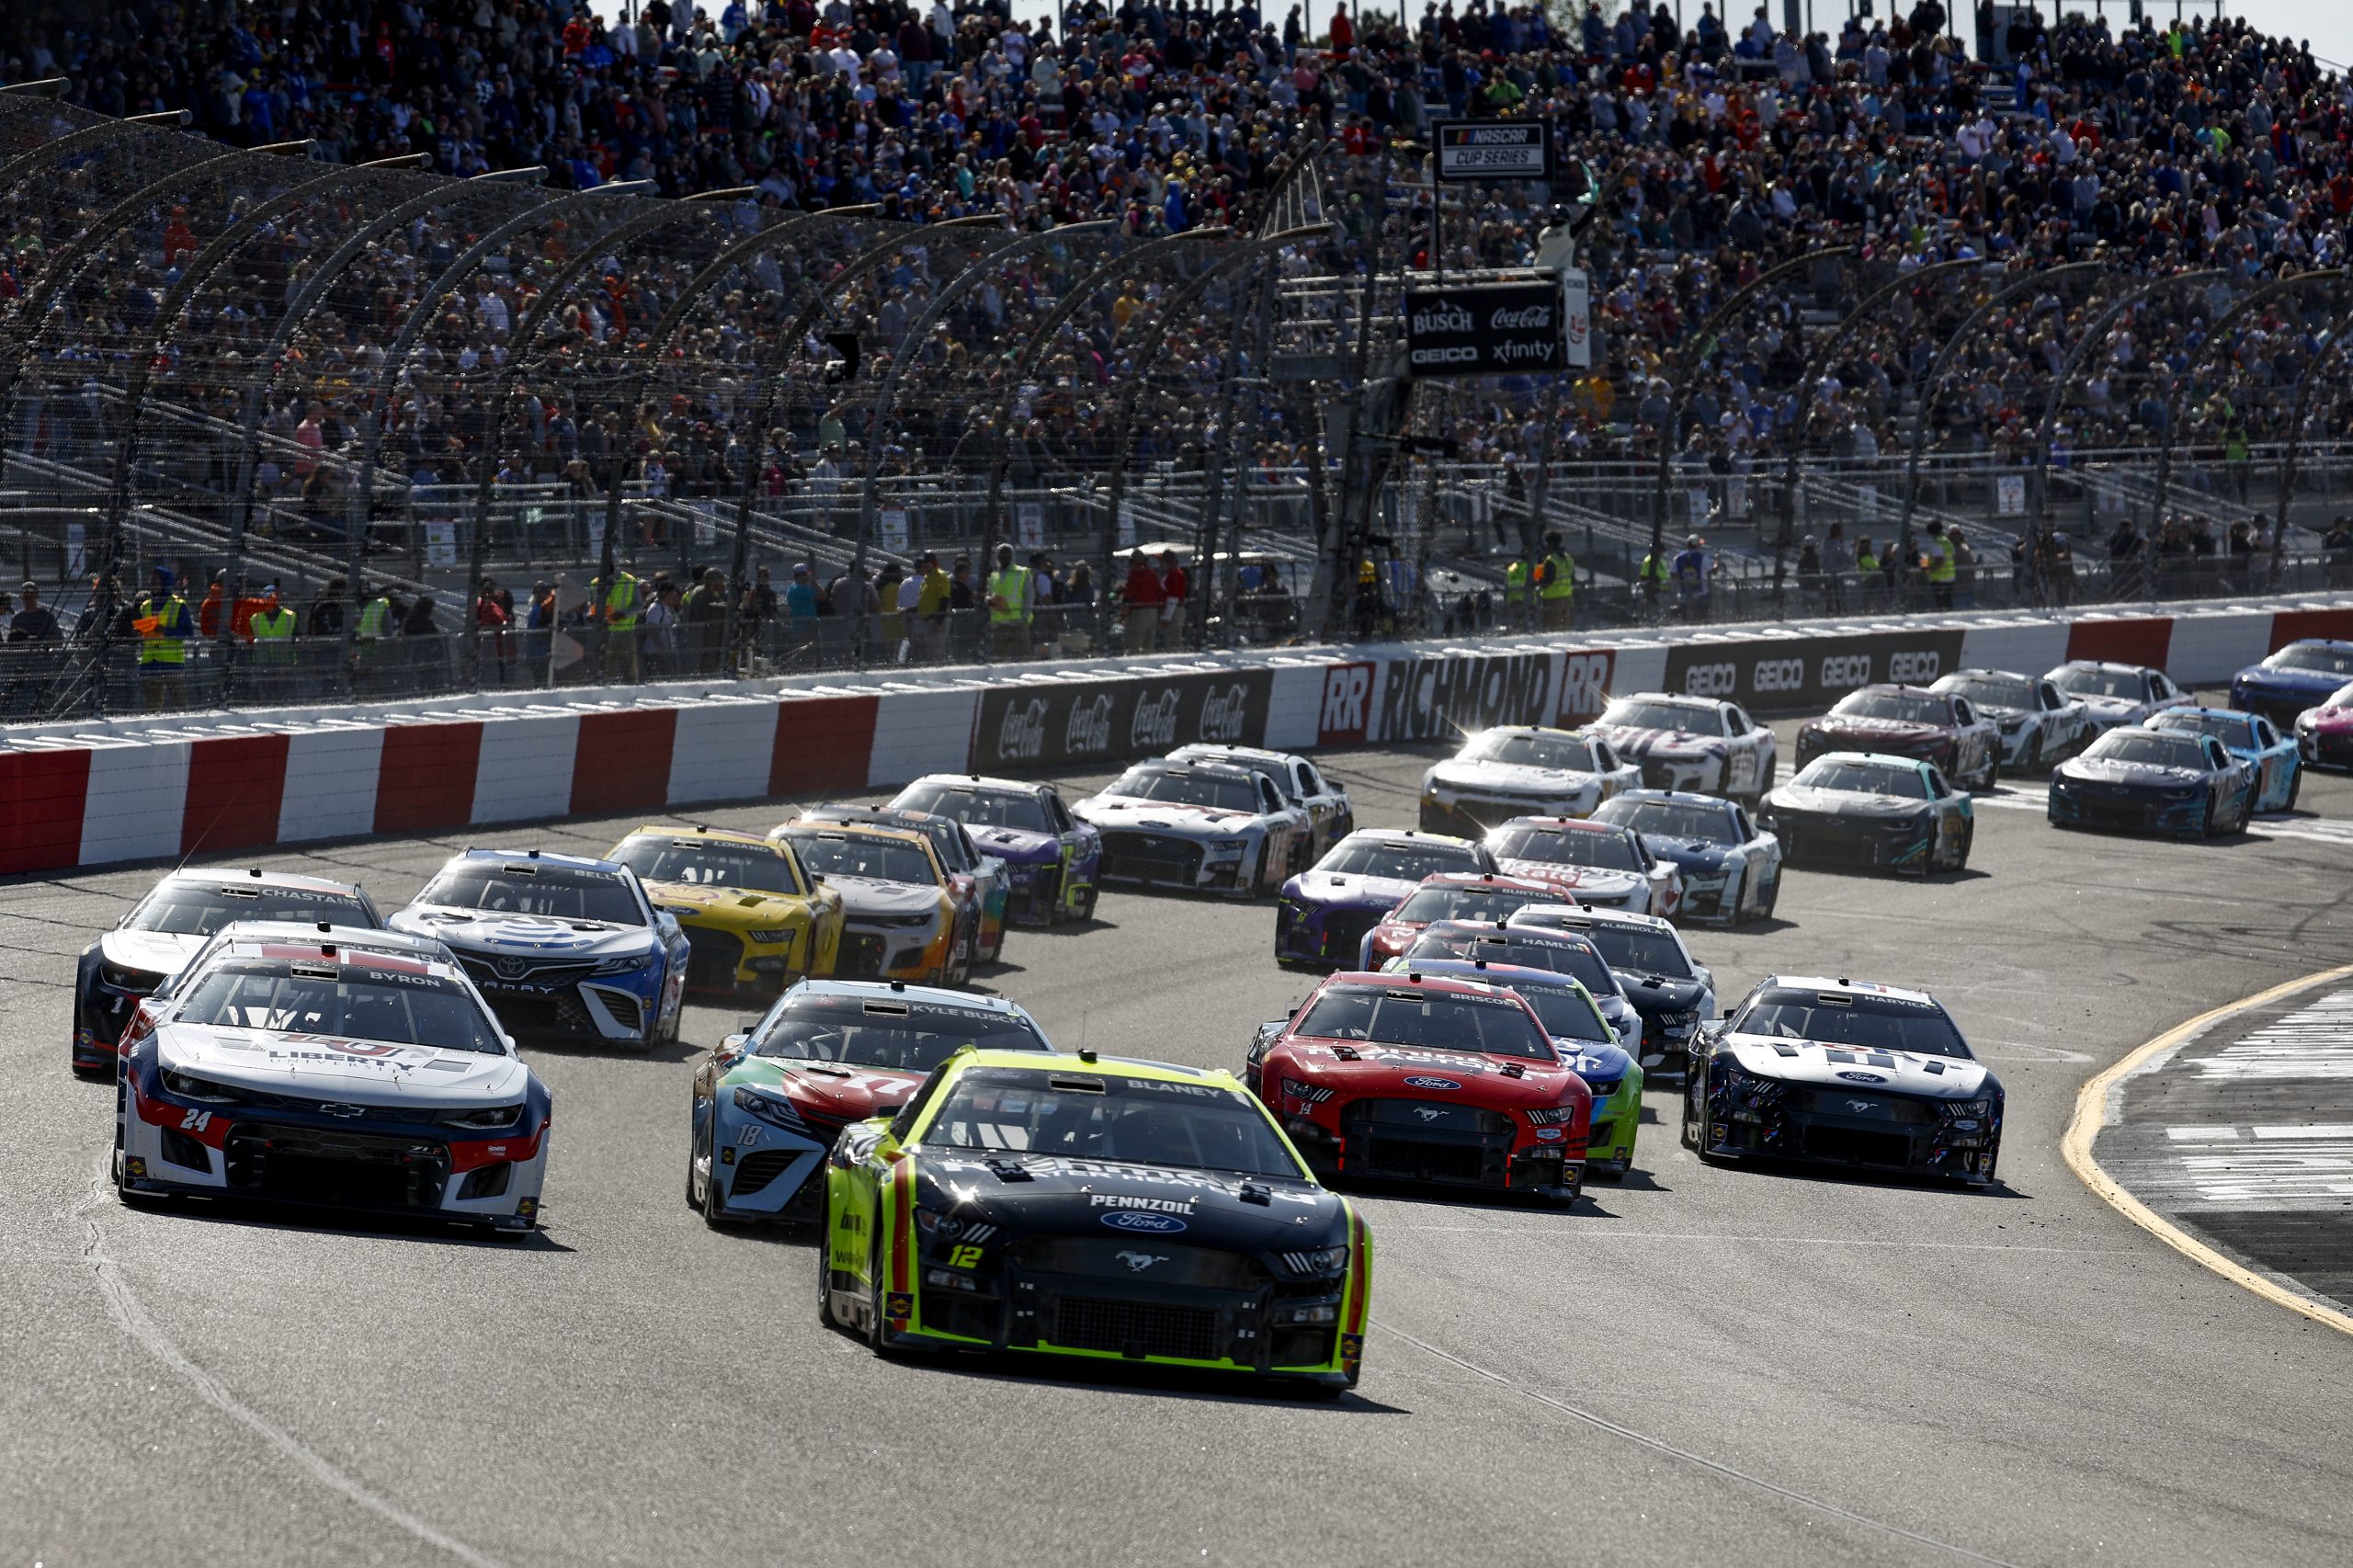 RICHMOND, VIRGINIA - APRIL 03: Ryan Blaney, driver of the #12 Menards/Richmond Water Heaters Ford, leads the field to start the NASCAR Cup Series Toyota Owners 400 at Richmond Raceway on April 03, 2022 in Richmond, Virginia. (Photo by Jared C. Tilton/Getty Images)